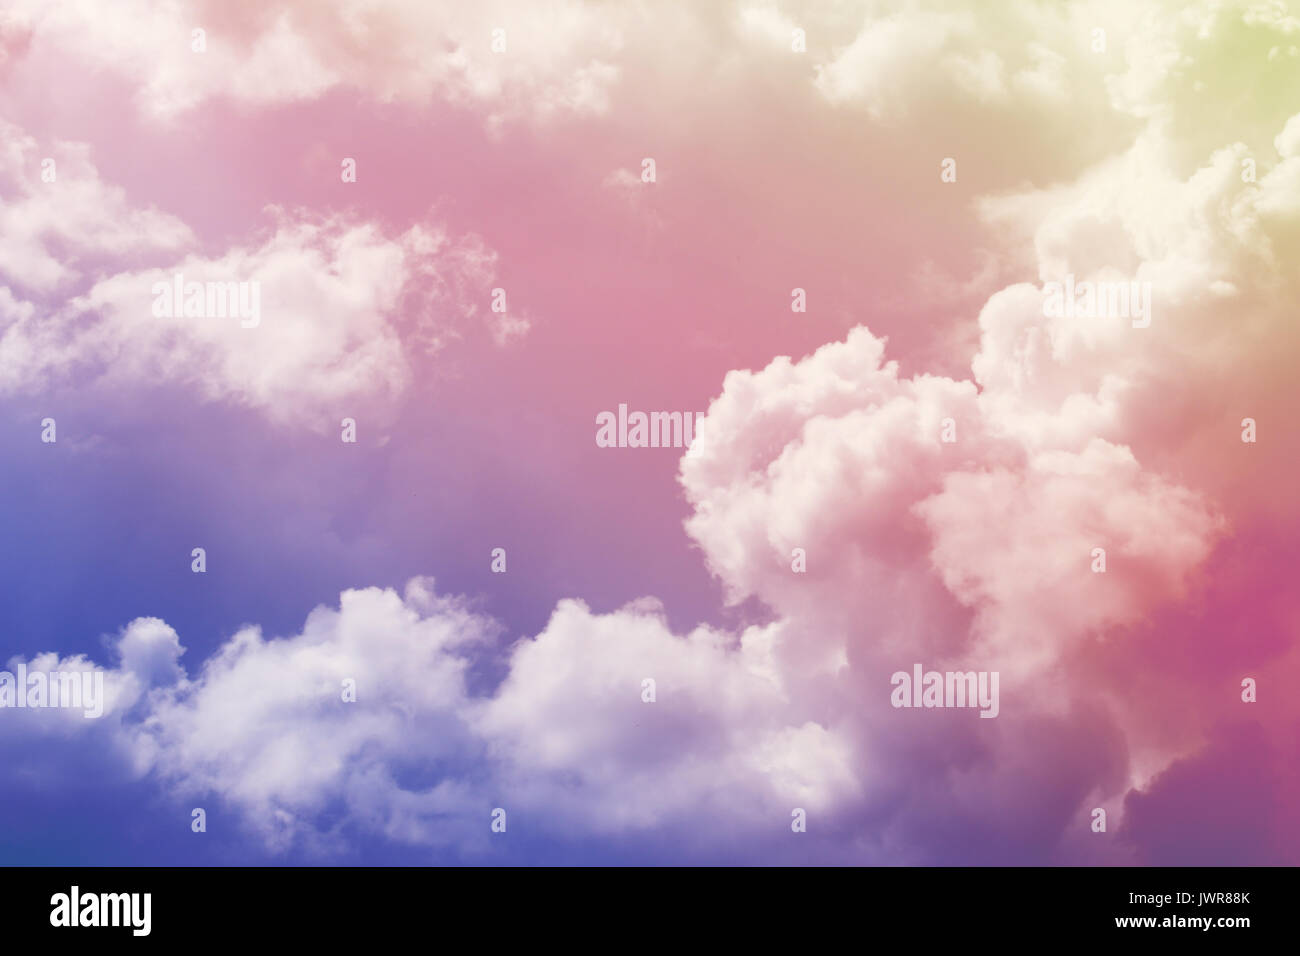 Rain Clouds In The Dark Sky With Pastel Color Tone For